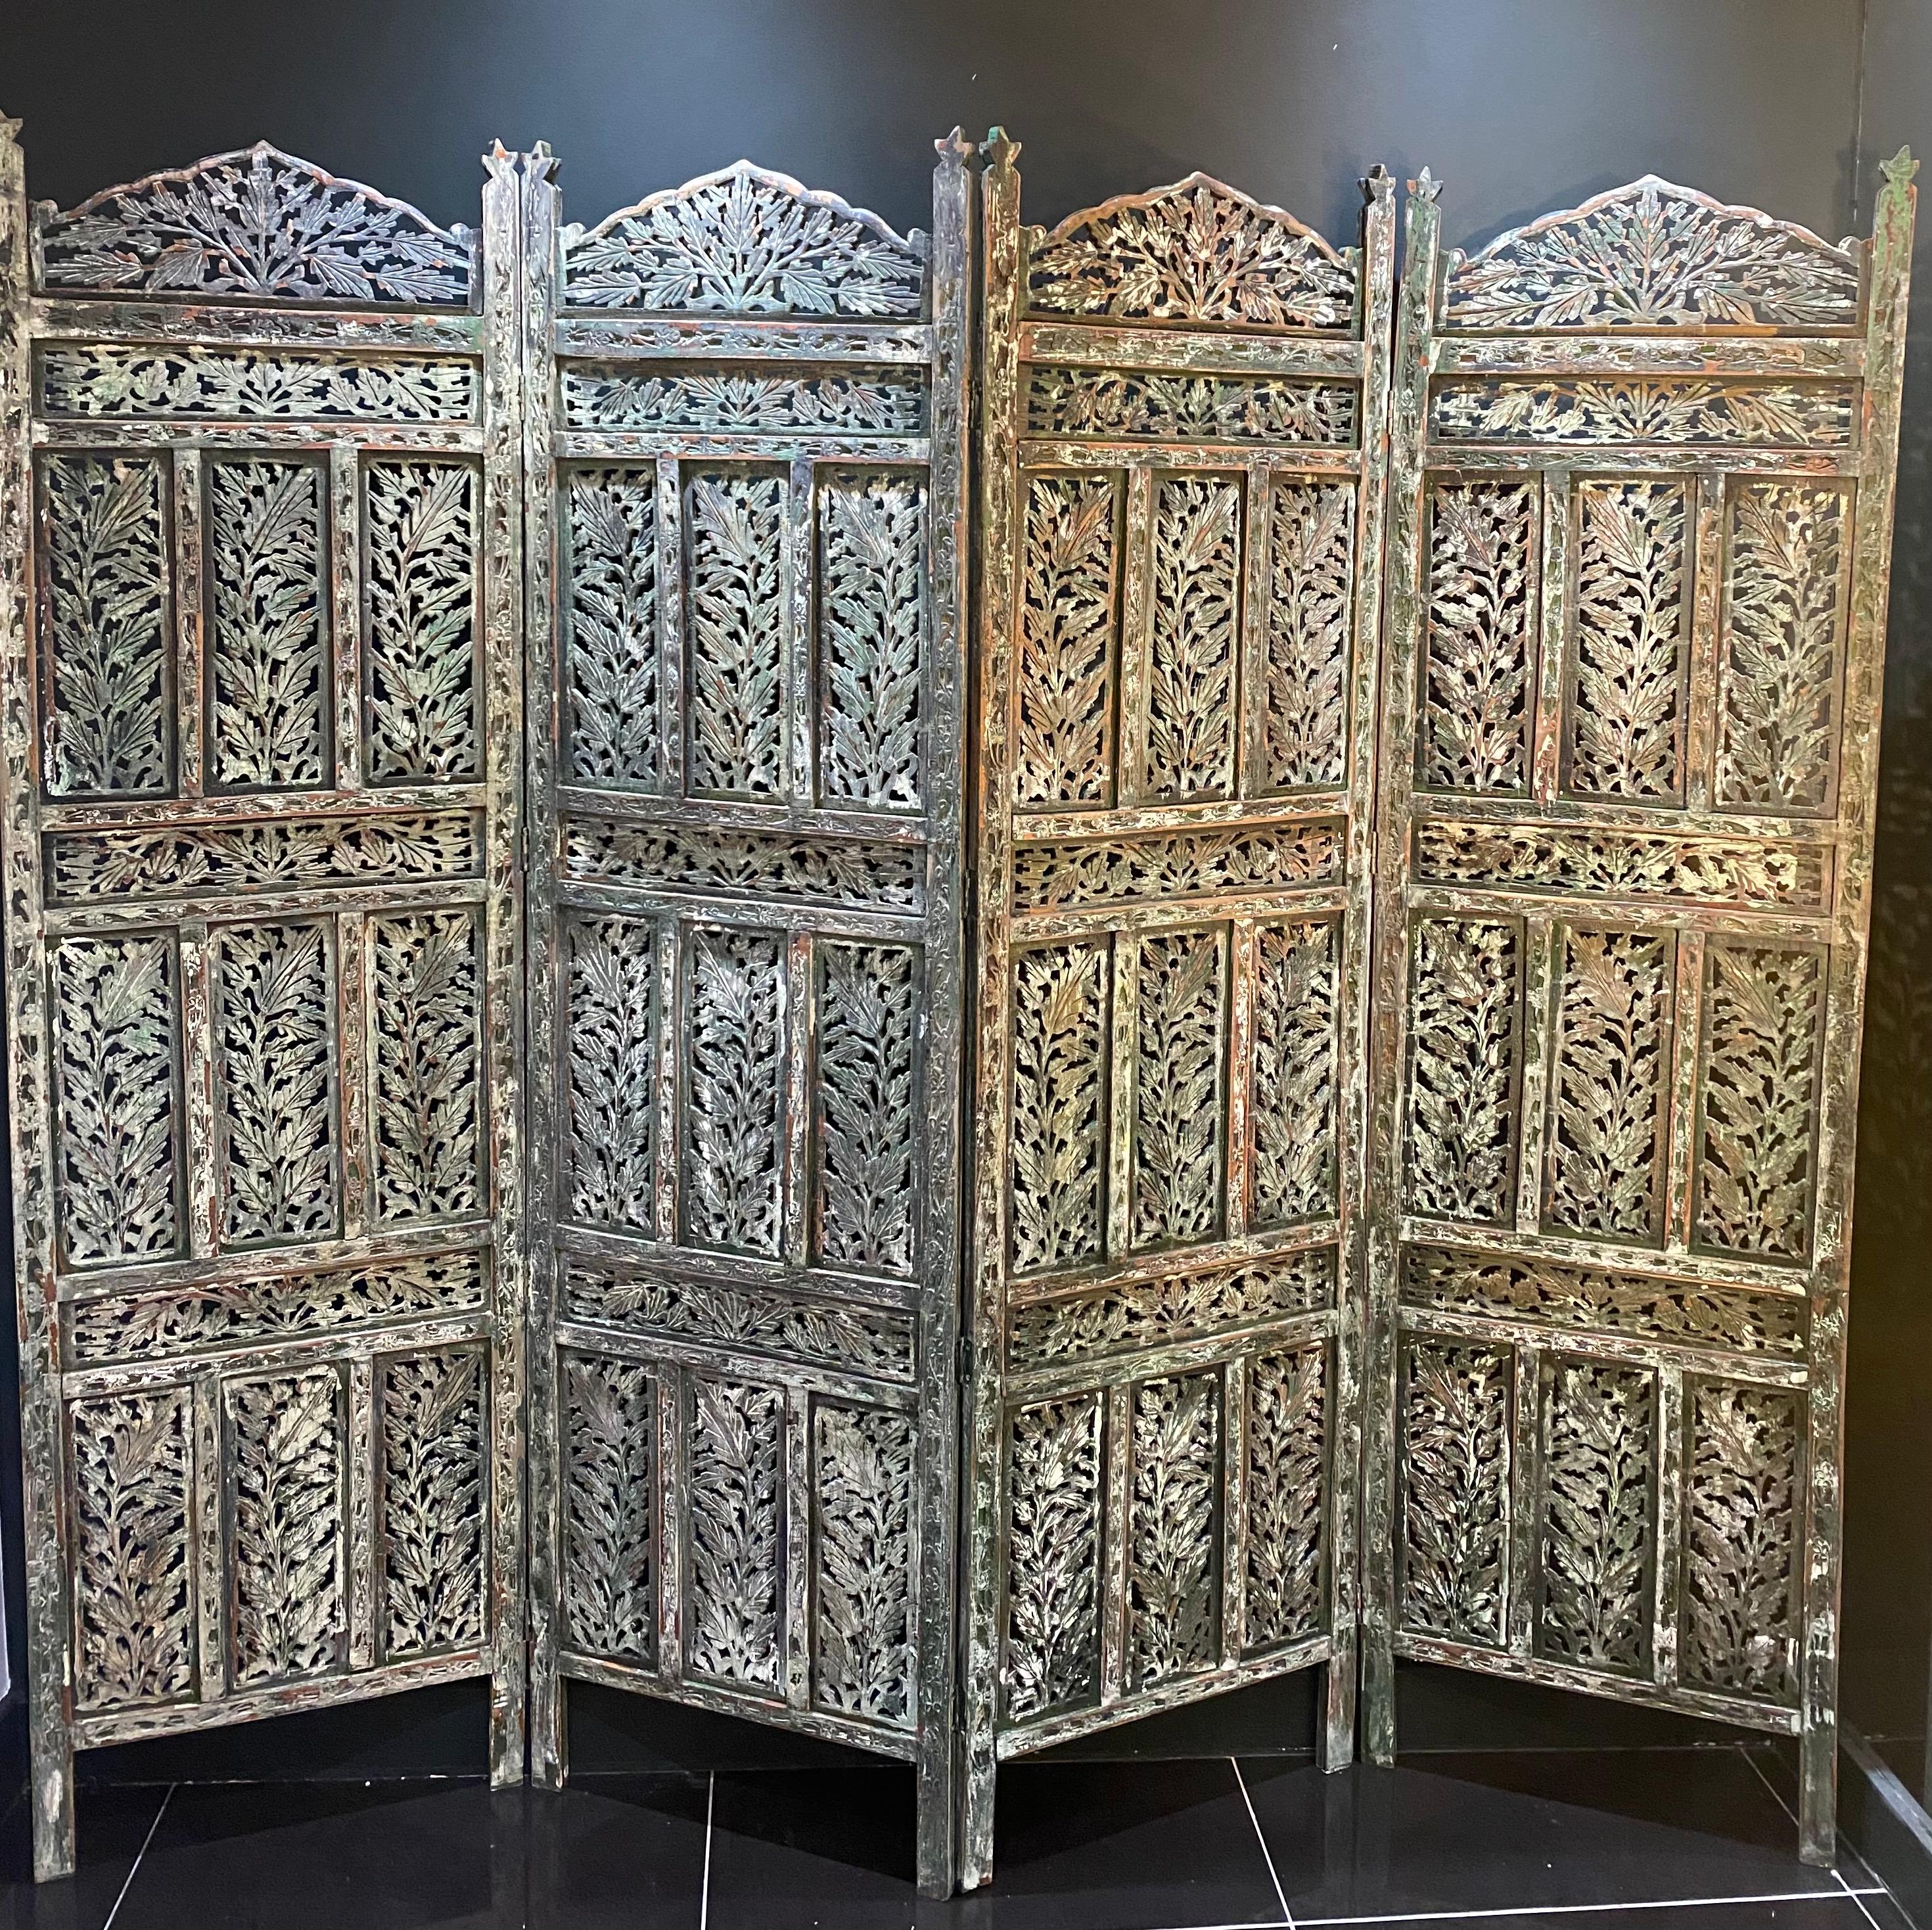 A fine carved early 20th century Italian hardwood room divider. The four panel screen features distinctly carved leaves in distressed soft green paint.

Dimensions: W:200cm H: 183cm D: 2.5cm Each panel width: 50cm.

 